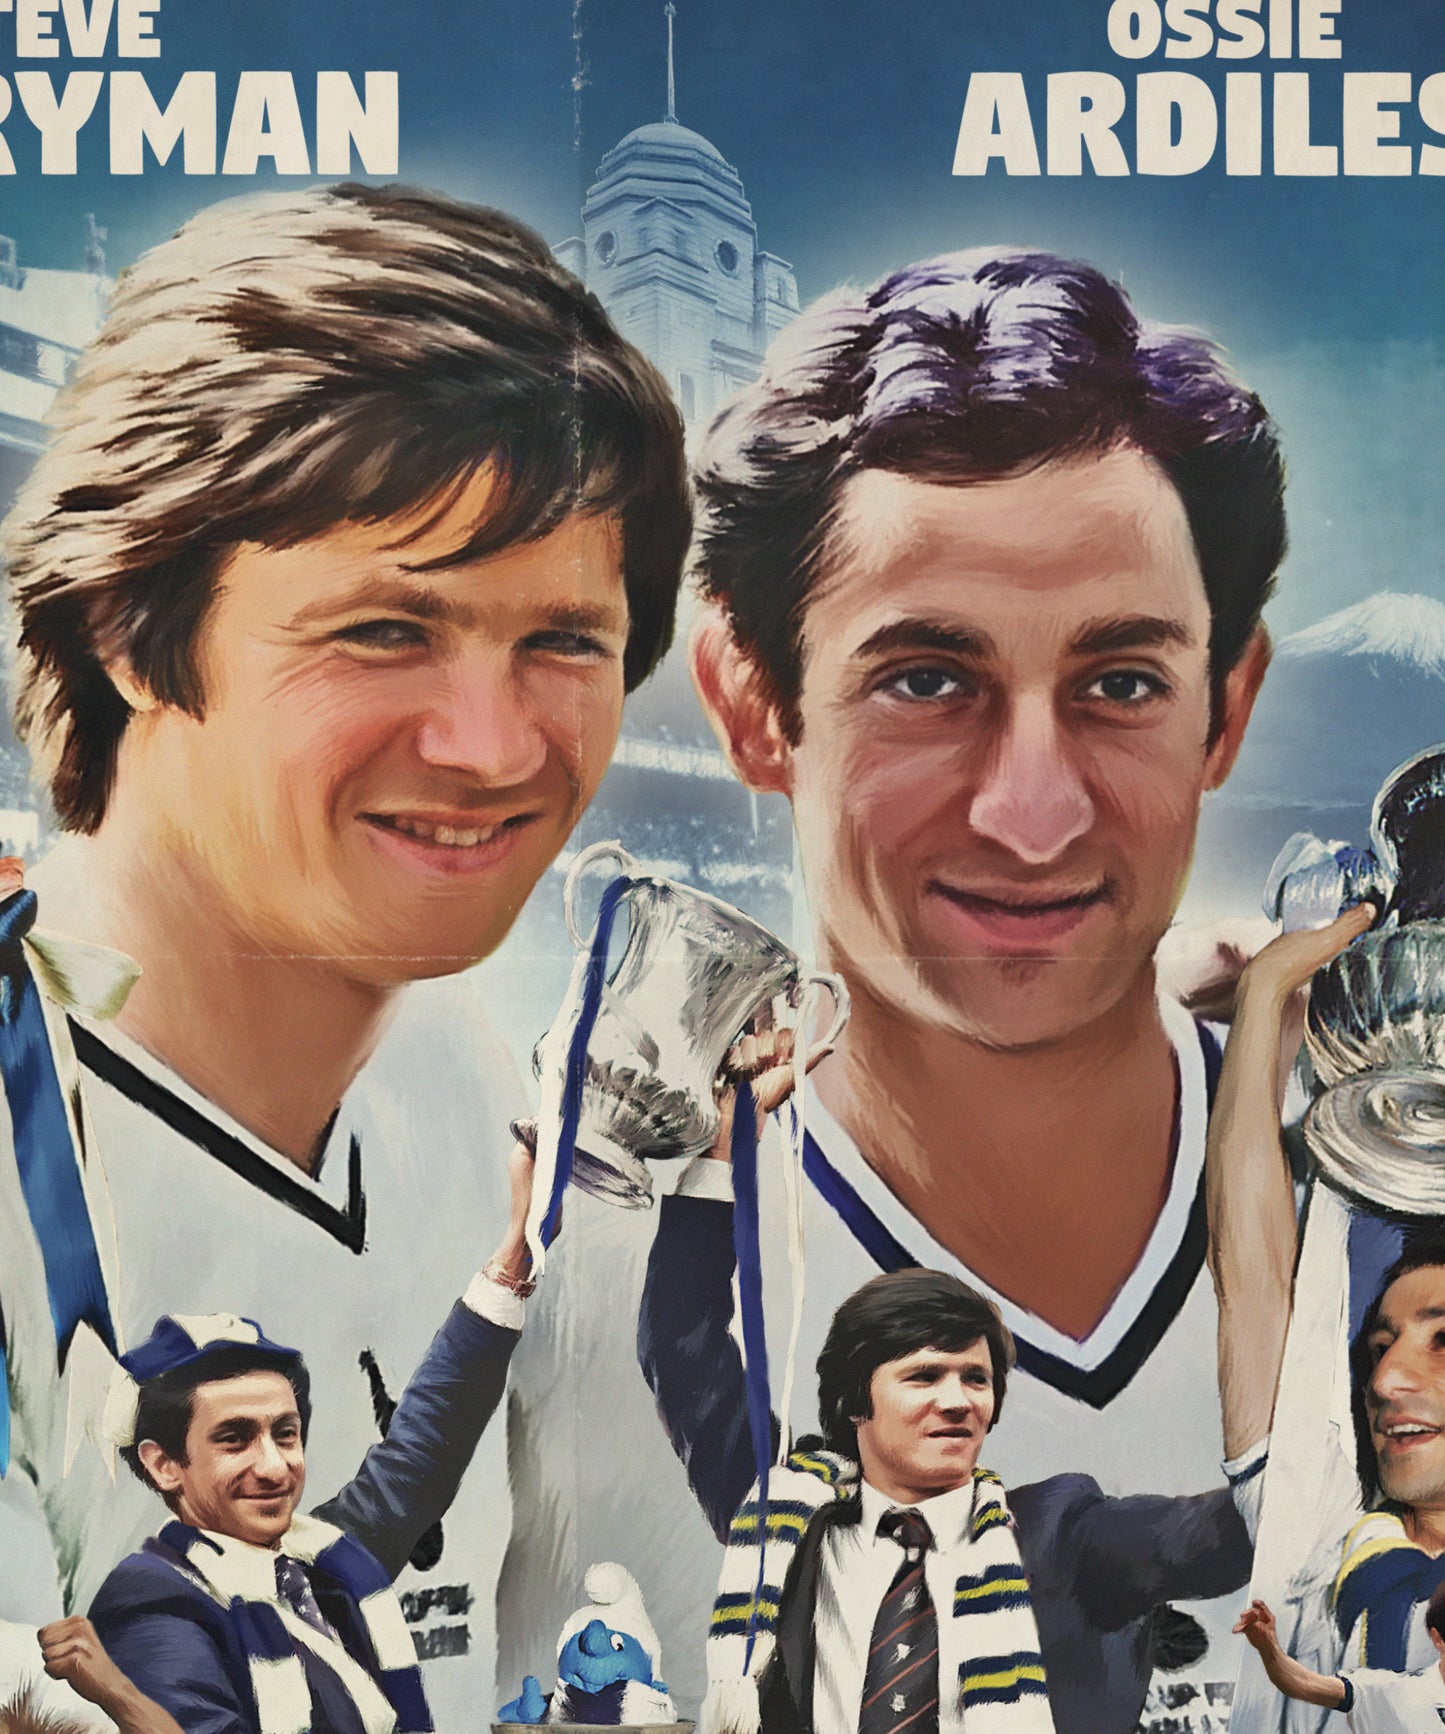 LEGENDS OF THE LANE - A3 Vintage Movie Poster (Signed by Steve Perryman & Ossie Ardiles)